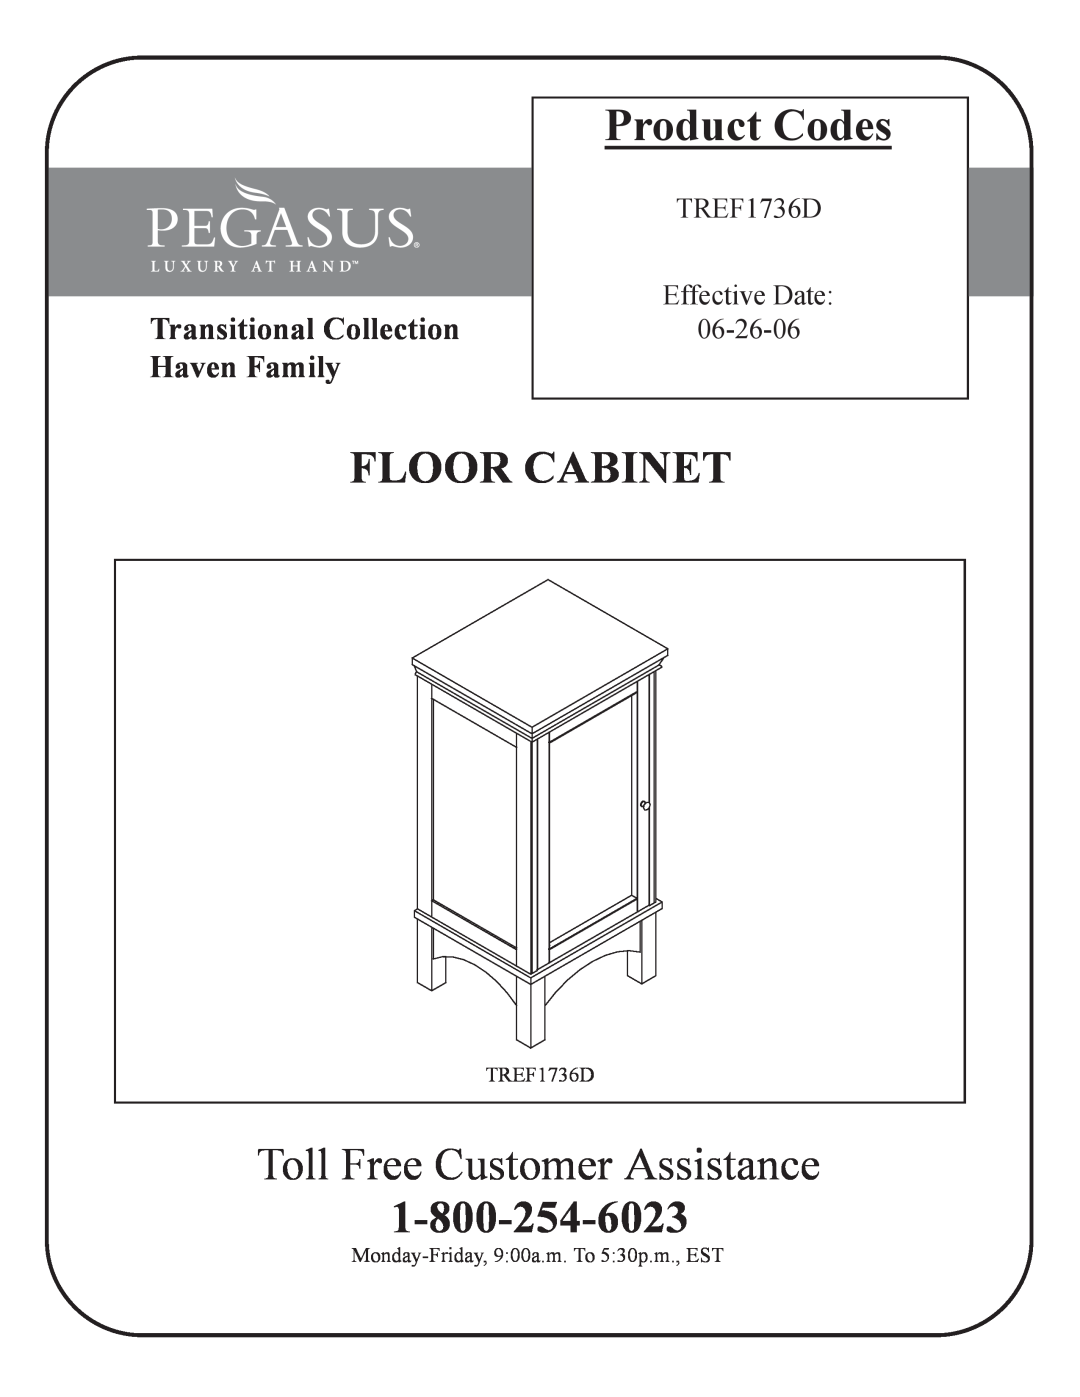 Husky TREF1736D manual Product Codes, Floor Cabinet, Toll Free Customer Assistance, Transitional Collection Haven Family 